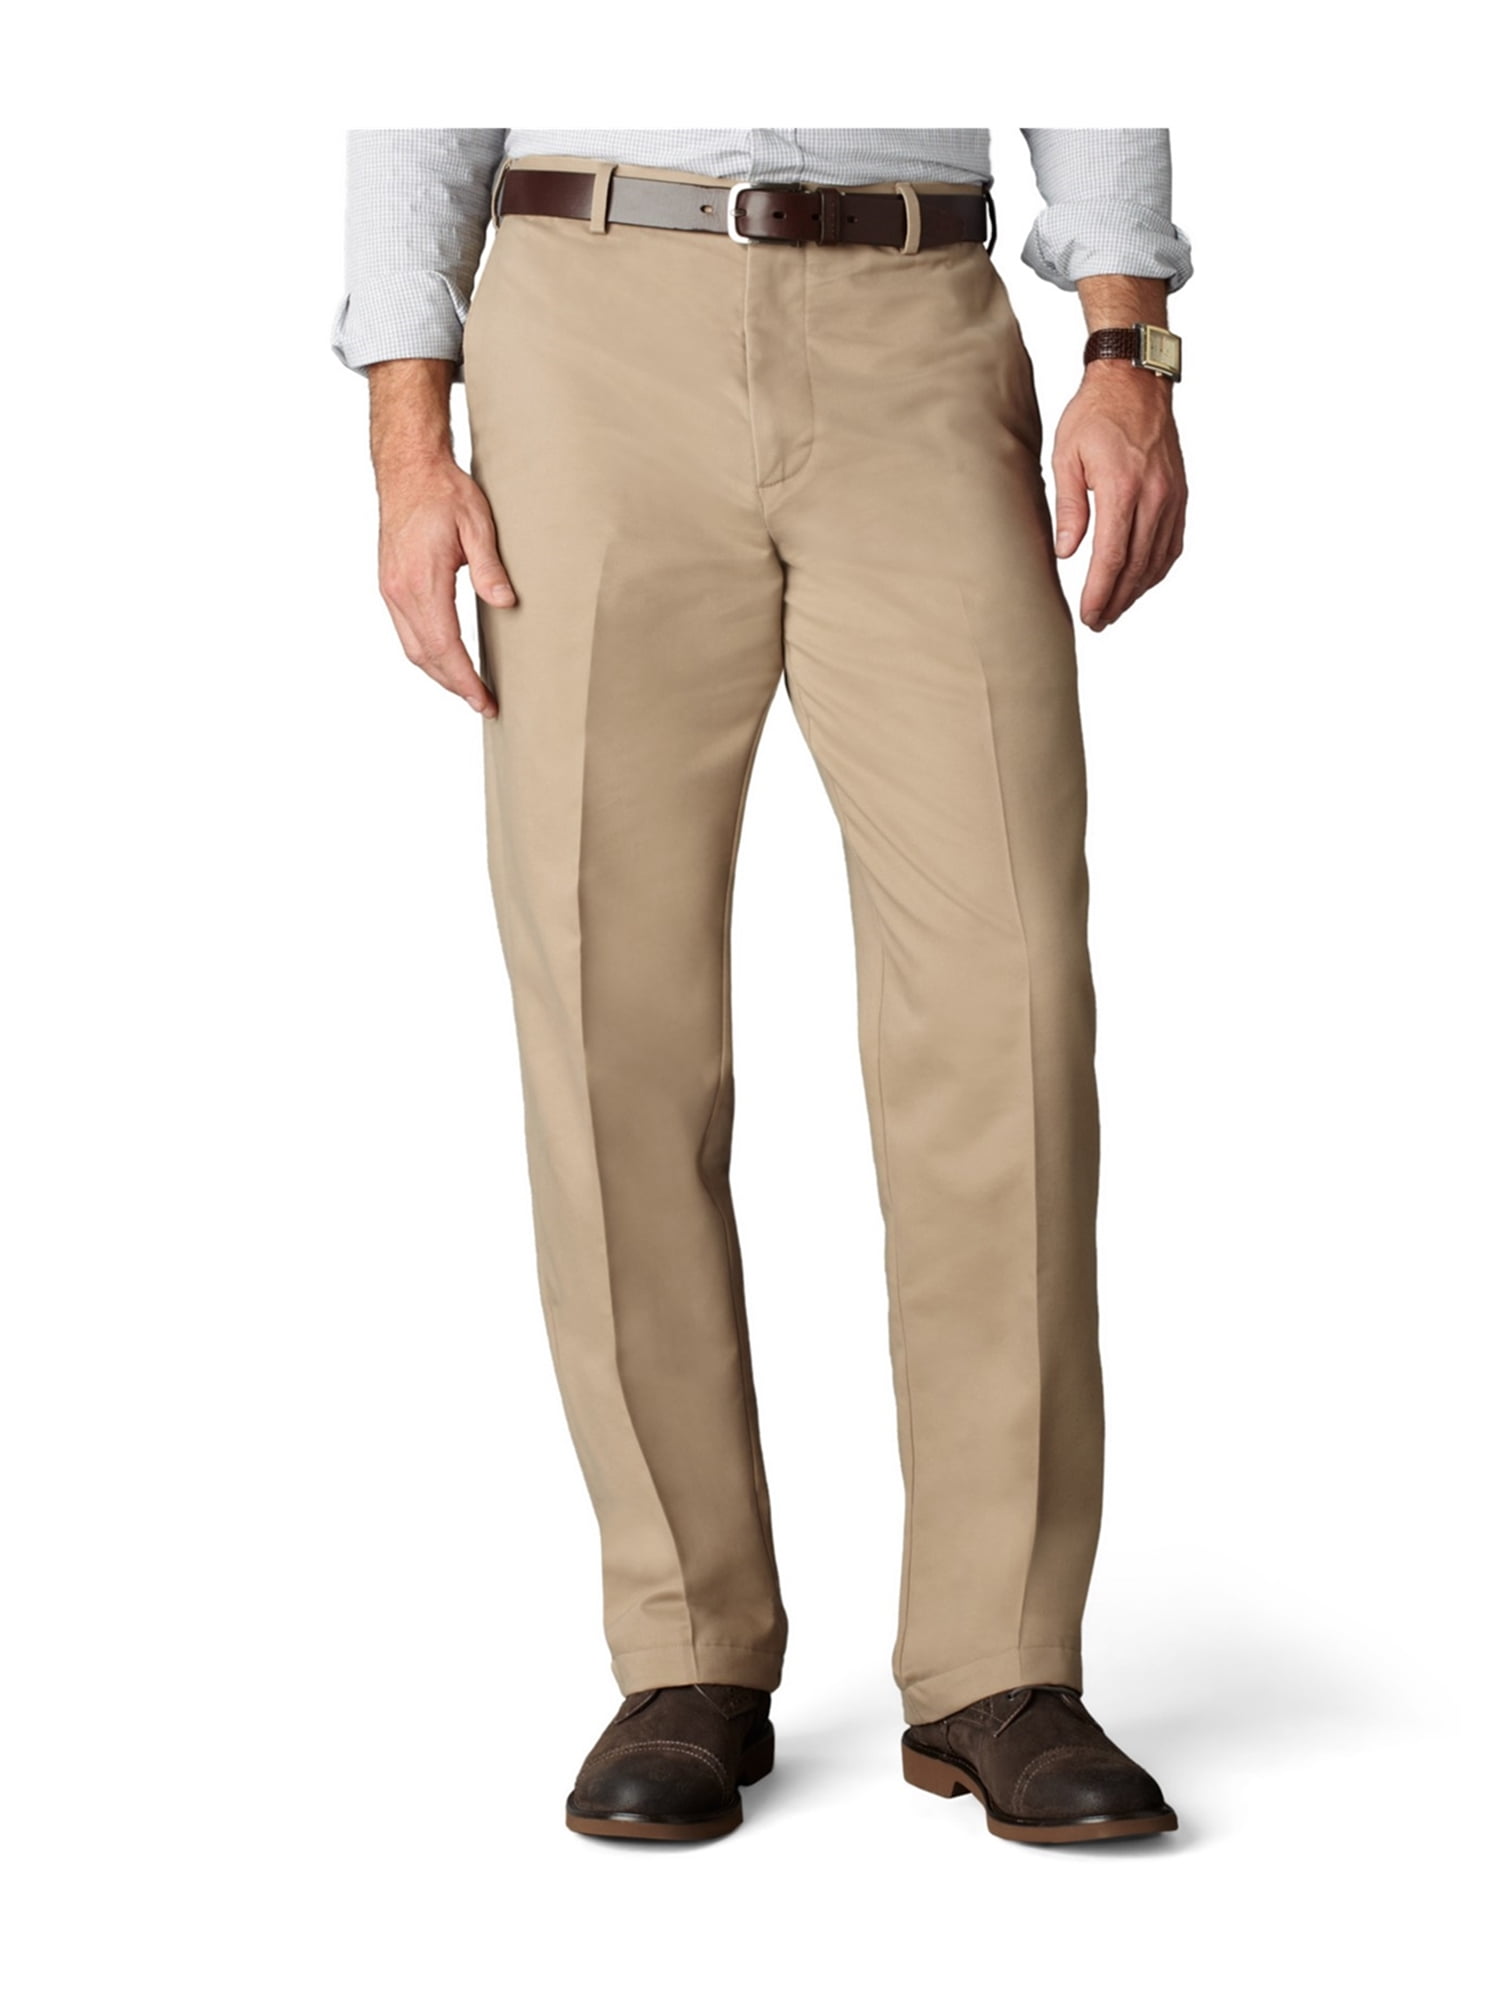 Relaxed Fit Chino Pants Hotsell, 57% OFF | www.ingeniovirtual.com